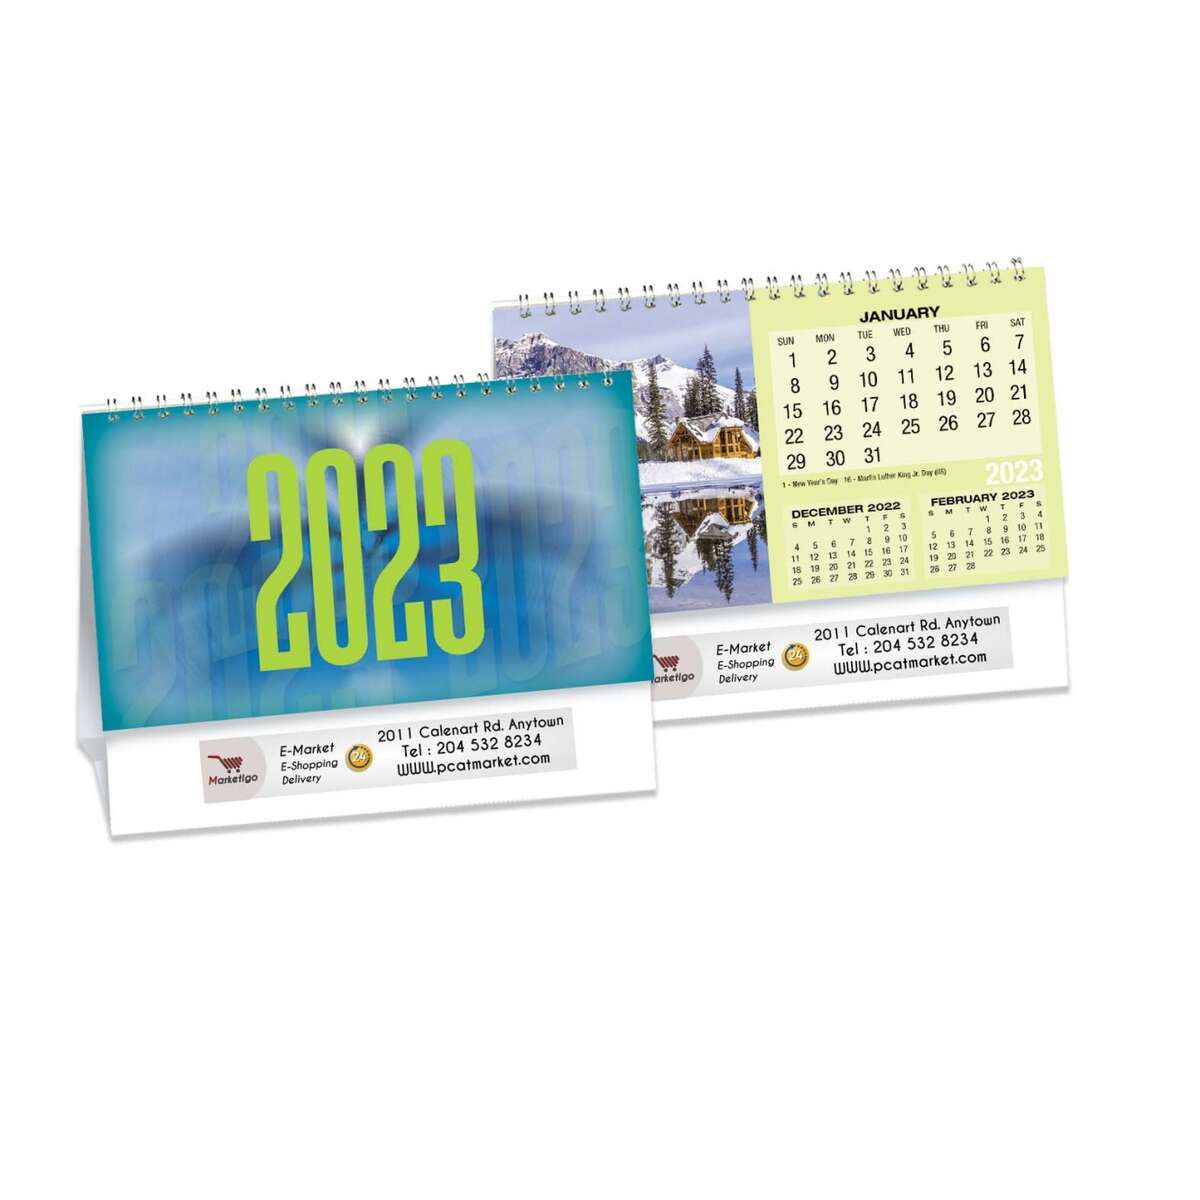 This 2023 desk calendar offers scenic views for your visual pleasure all year long.